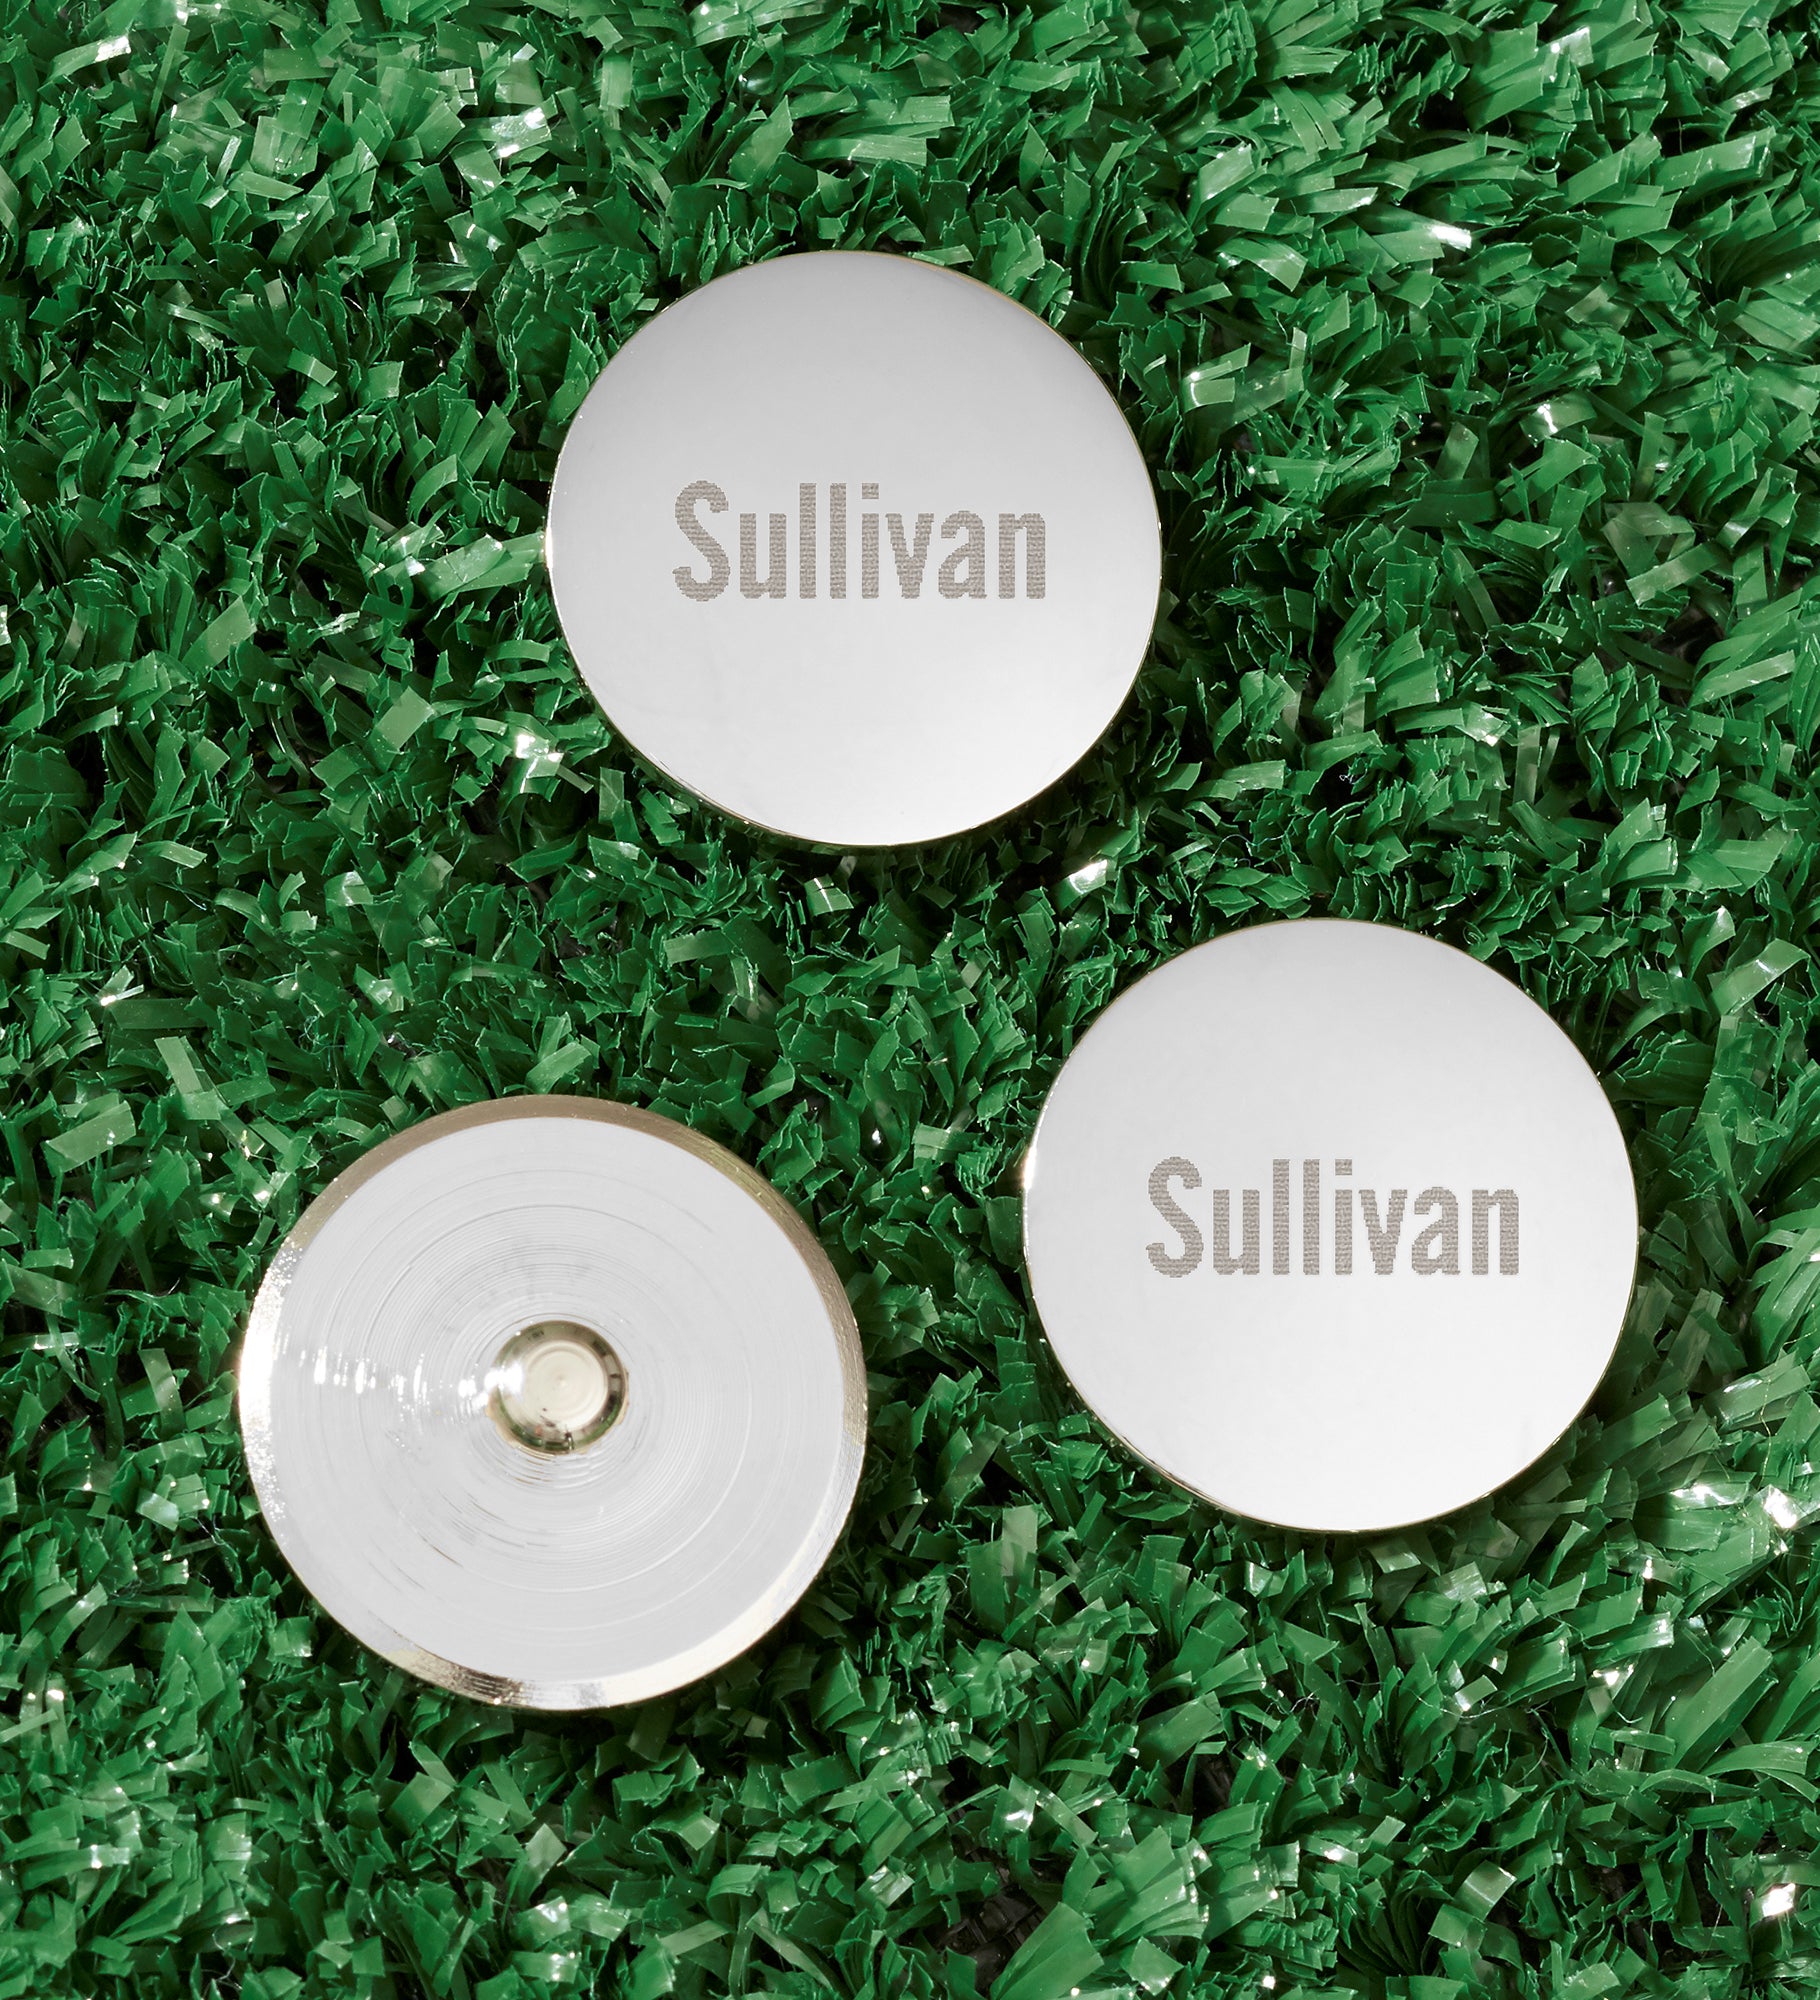 Silver Engraved Personalized Golf Ball Markers- Set of 3